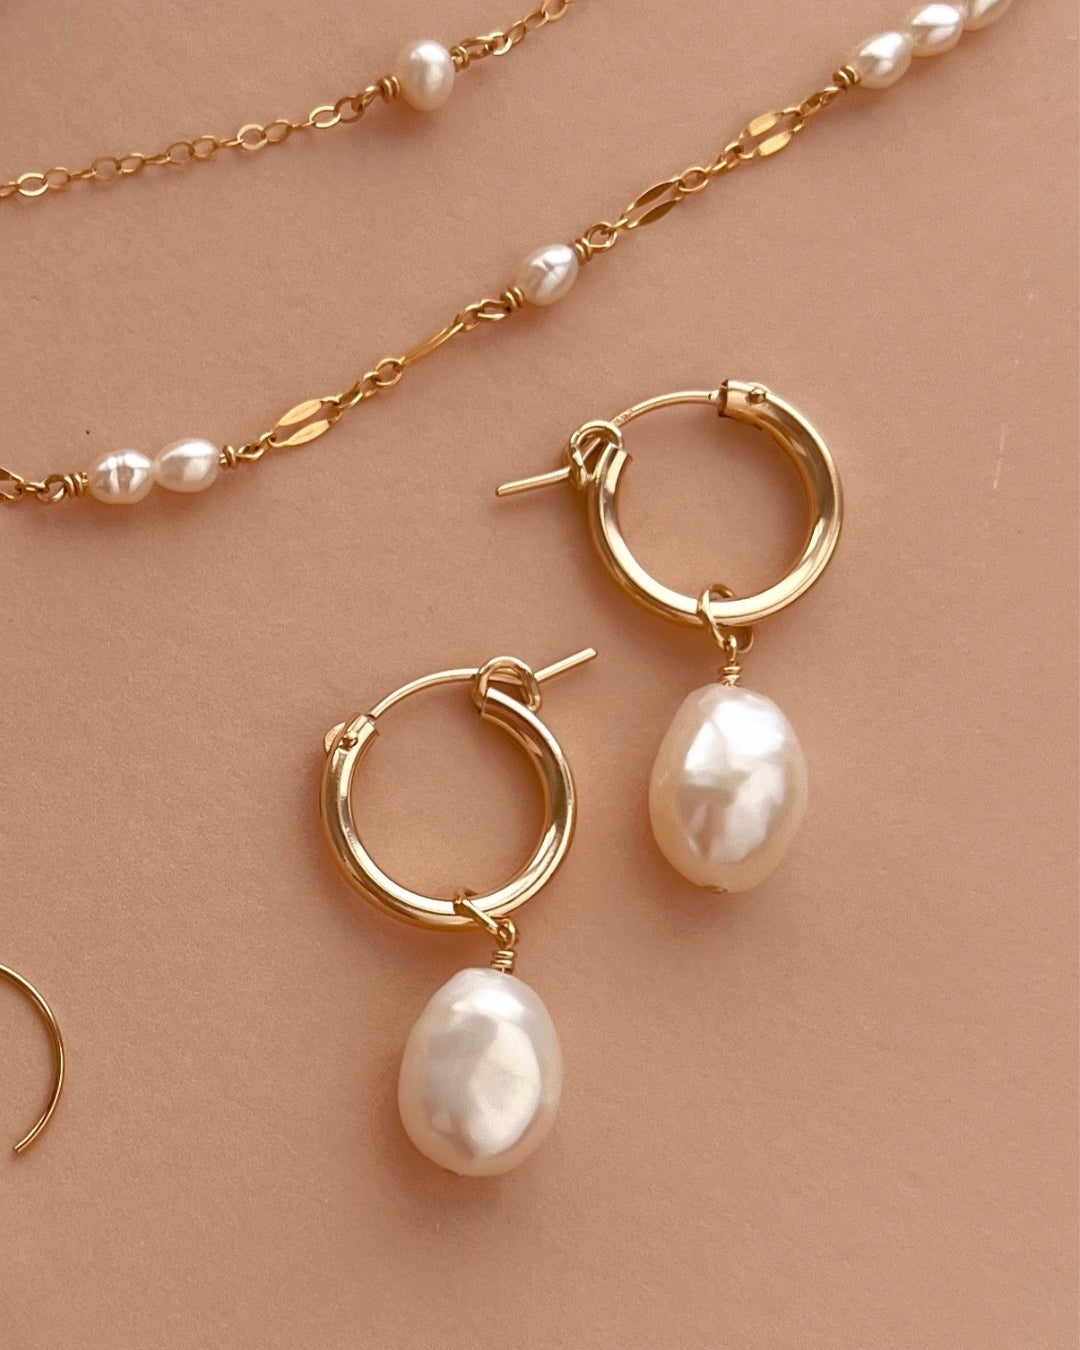 Presence Pearl Necklace and Earrings Set